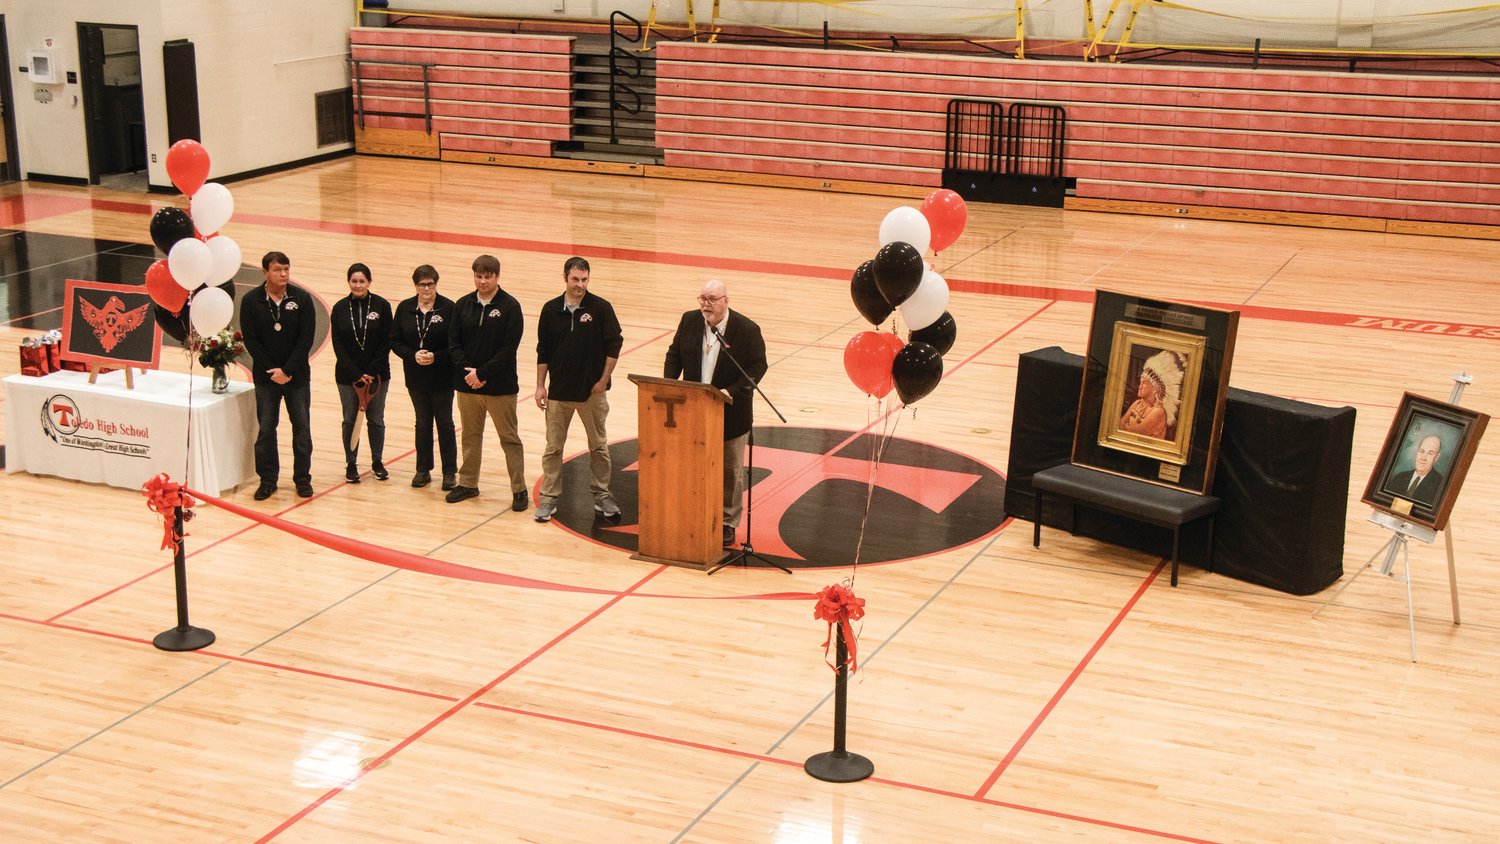 Chris Rust, superintendent of Toledo School District, addresses attendees of a ribbon cutting ceremony inside George Murdock Gymnasium on Friday.